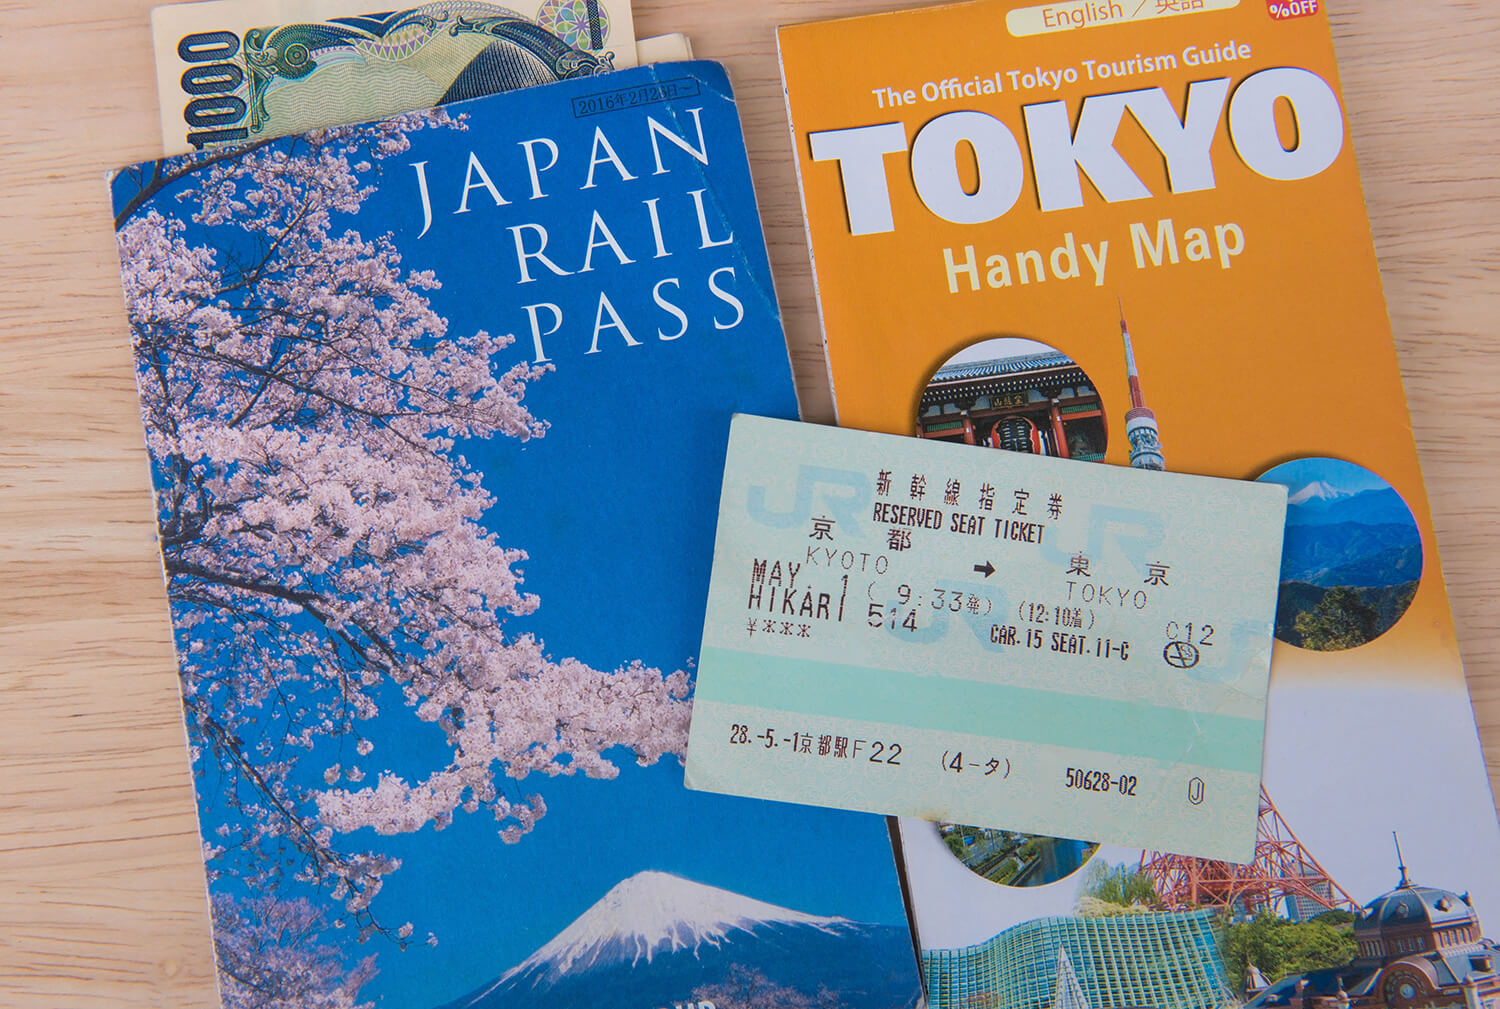 Is it worth buying a Japan Rail Pass for my Japan trip - Answered